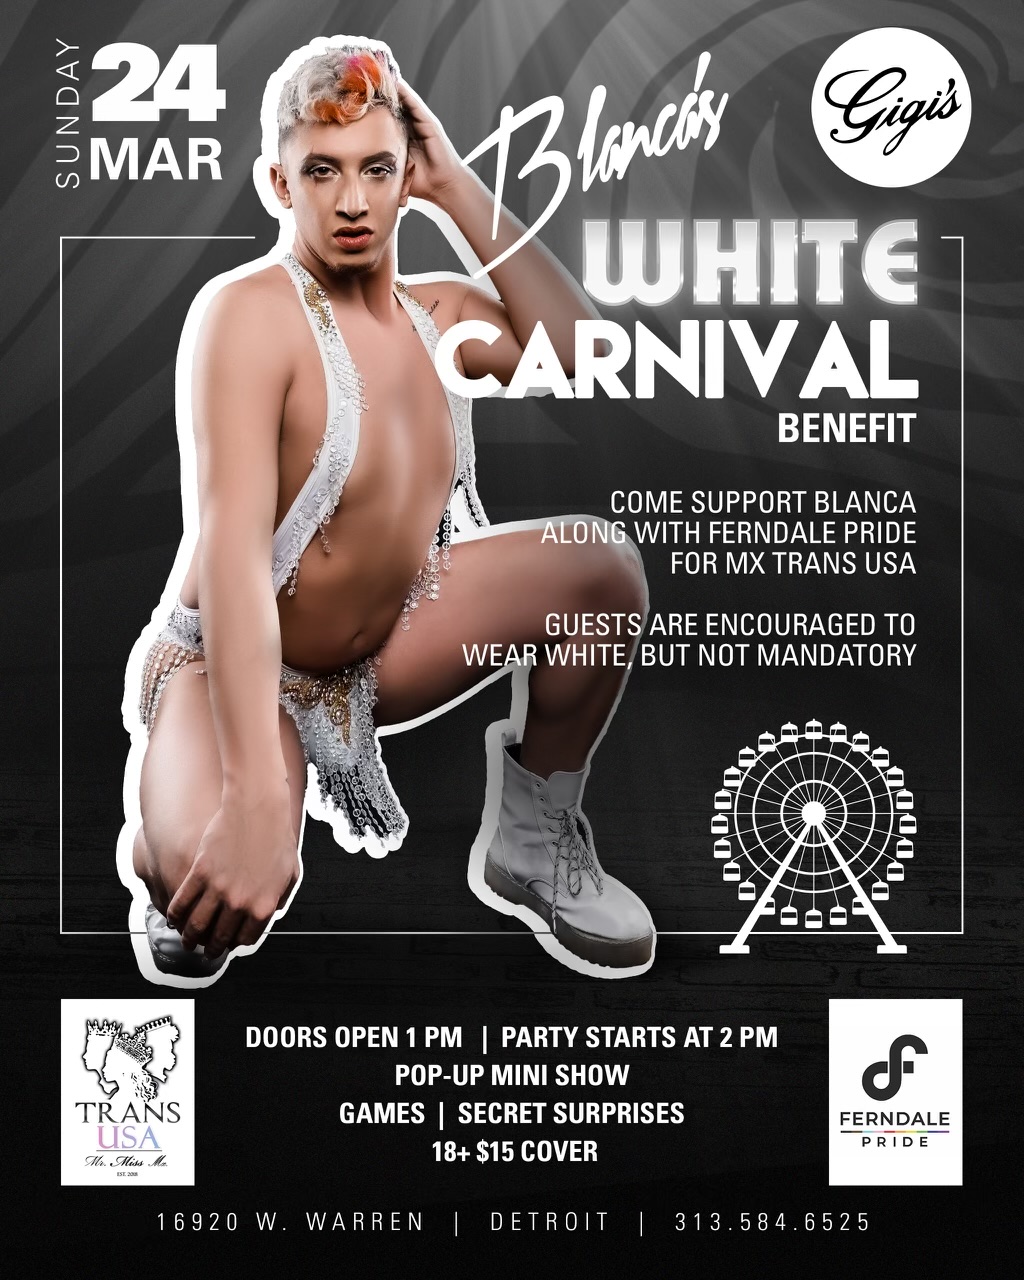 Featured image for “Blanca’s White Carnival Benefit”